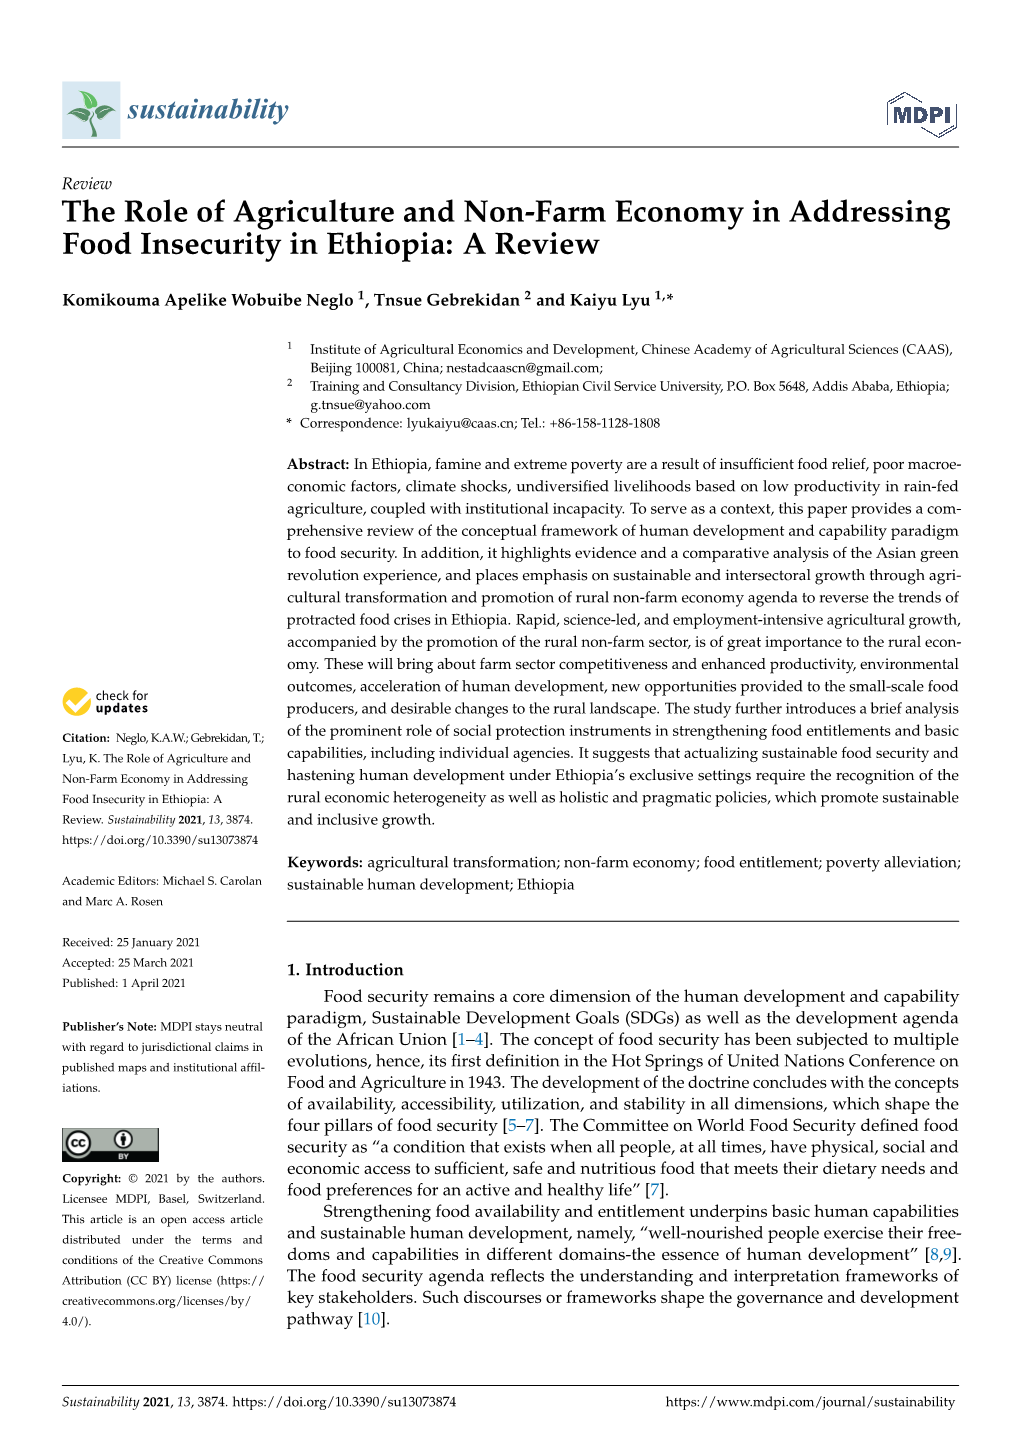 The Role of Agriculture and Non-Farm Economy in Addressing Food Insecurity in Ethiopia: a Review